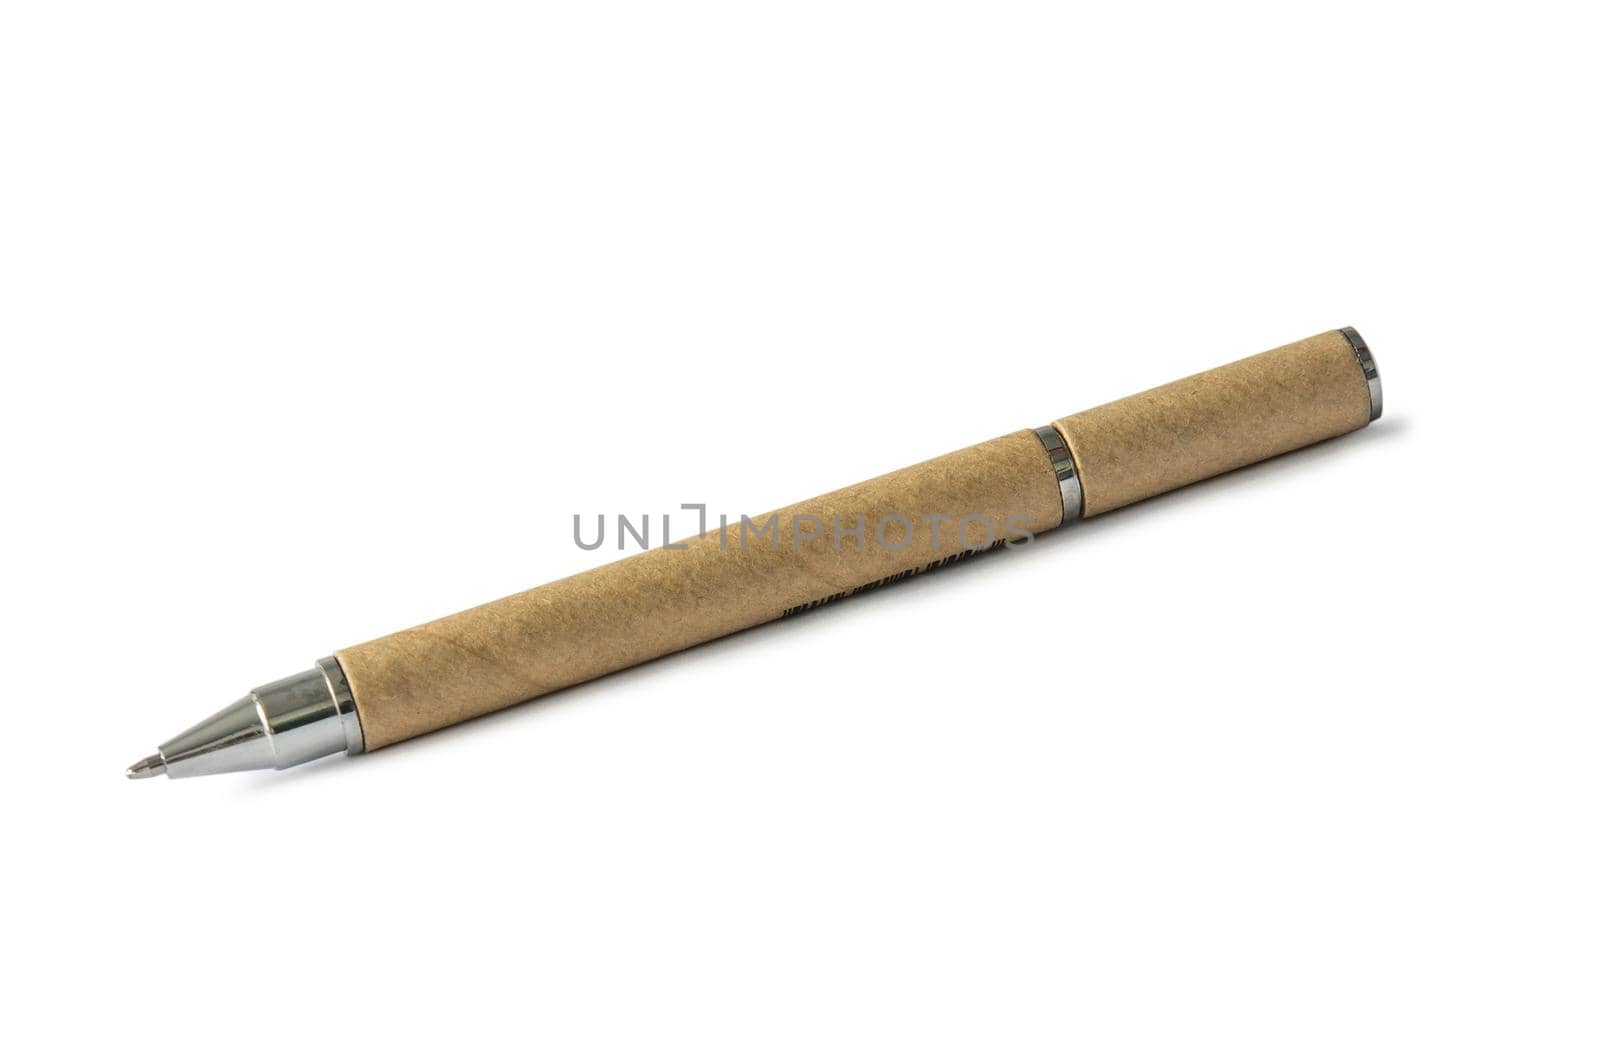 brownn eco pen in carton cover isolated on white background